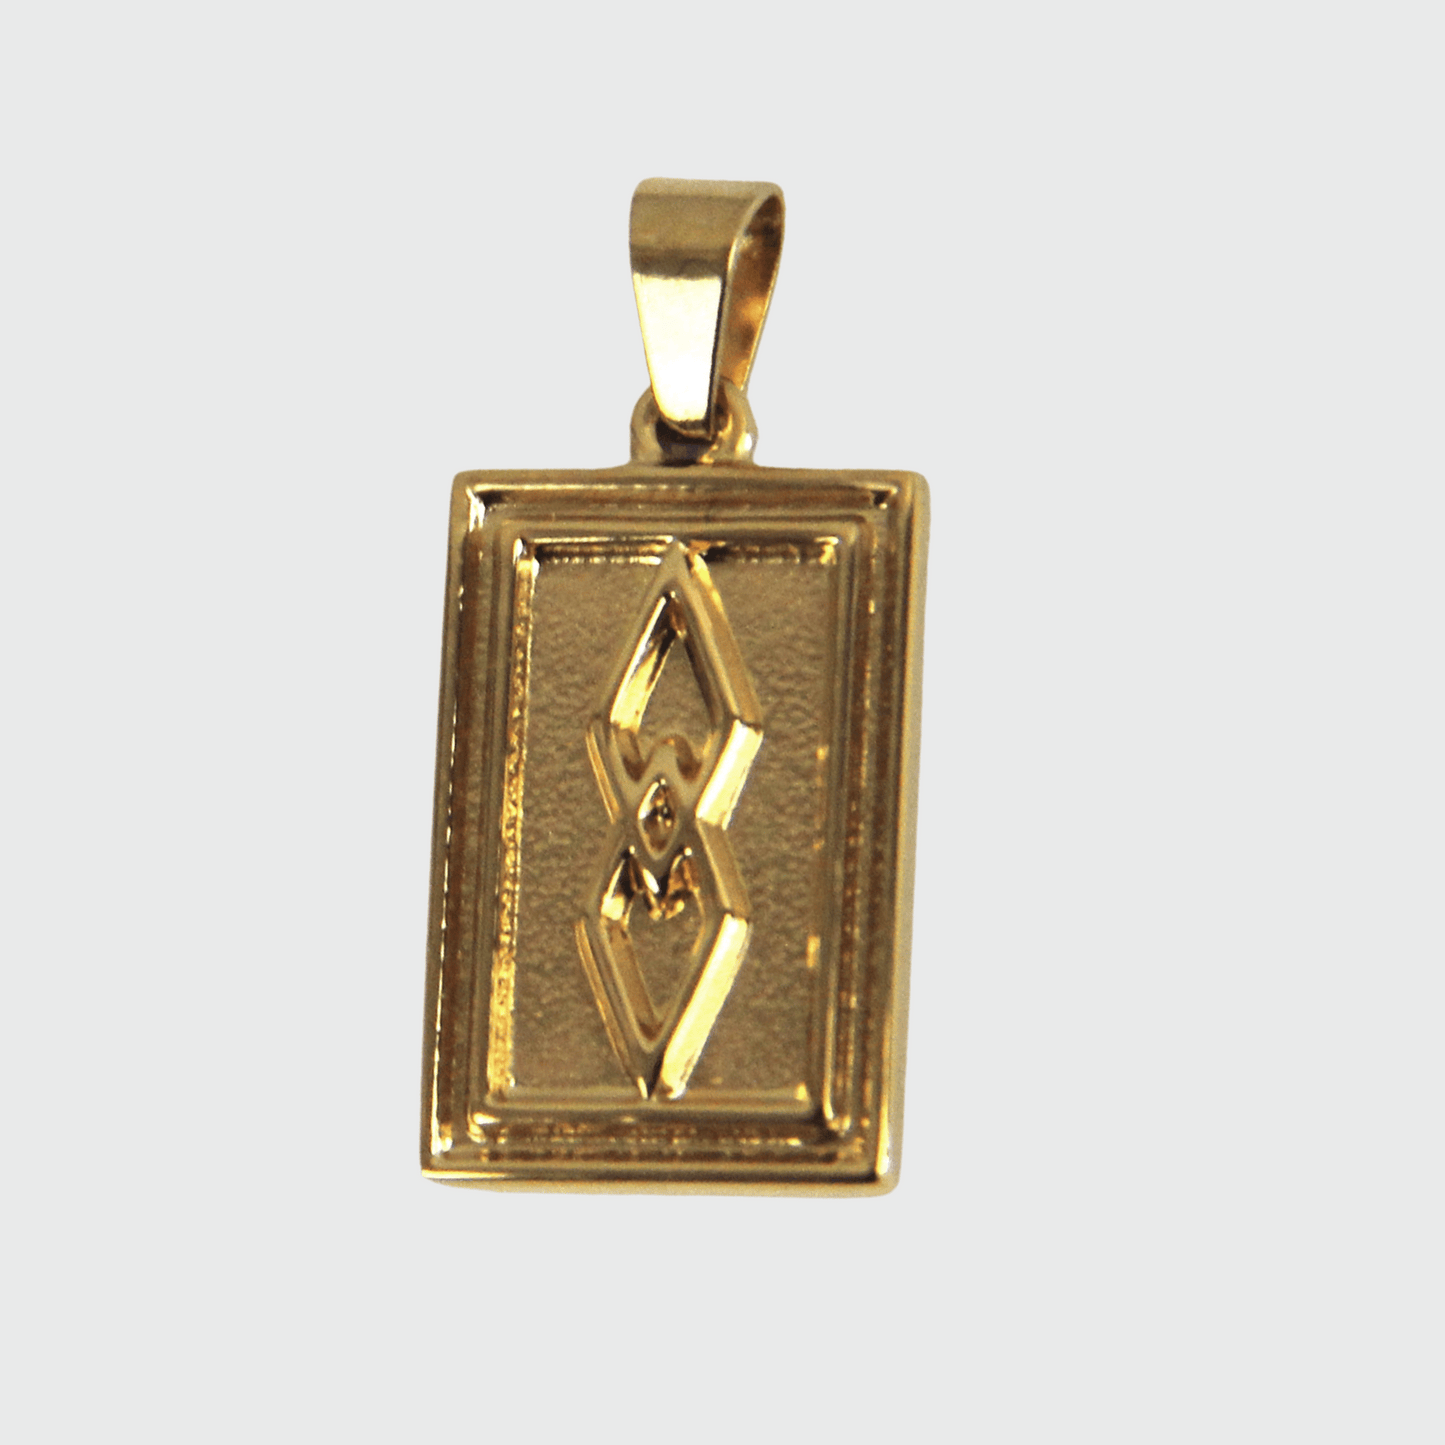 Silver or Gold Stainless Steel Rectangle Pendant - Boutique wear RENN